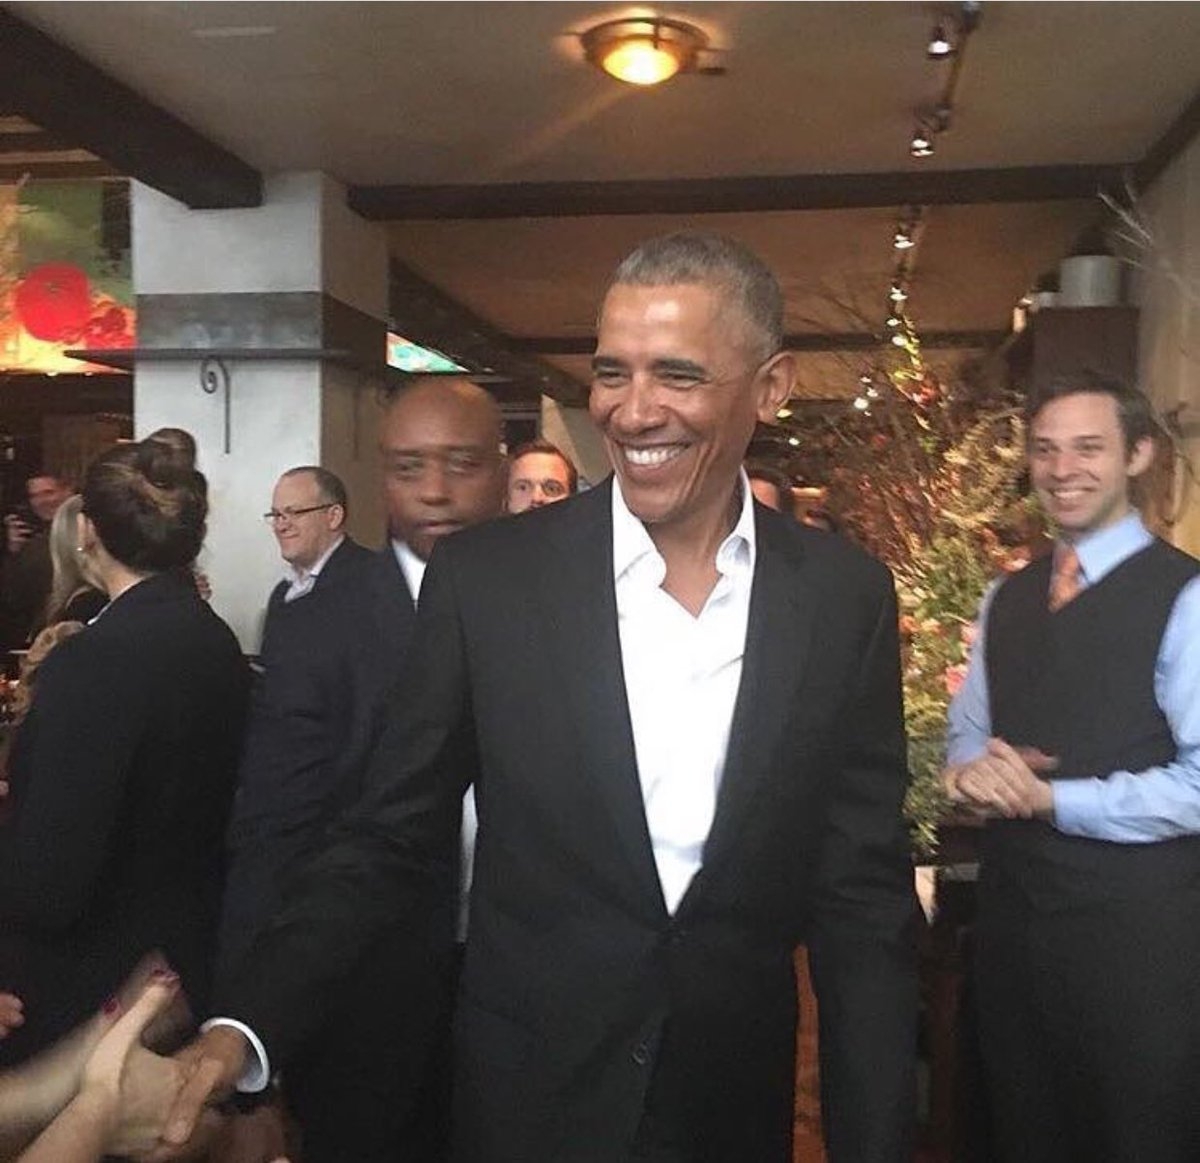 Obama Is Back From Vacation And Looking 100%